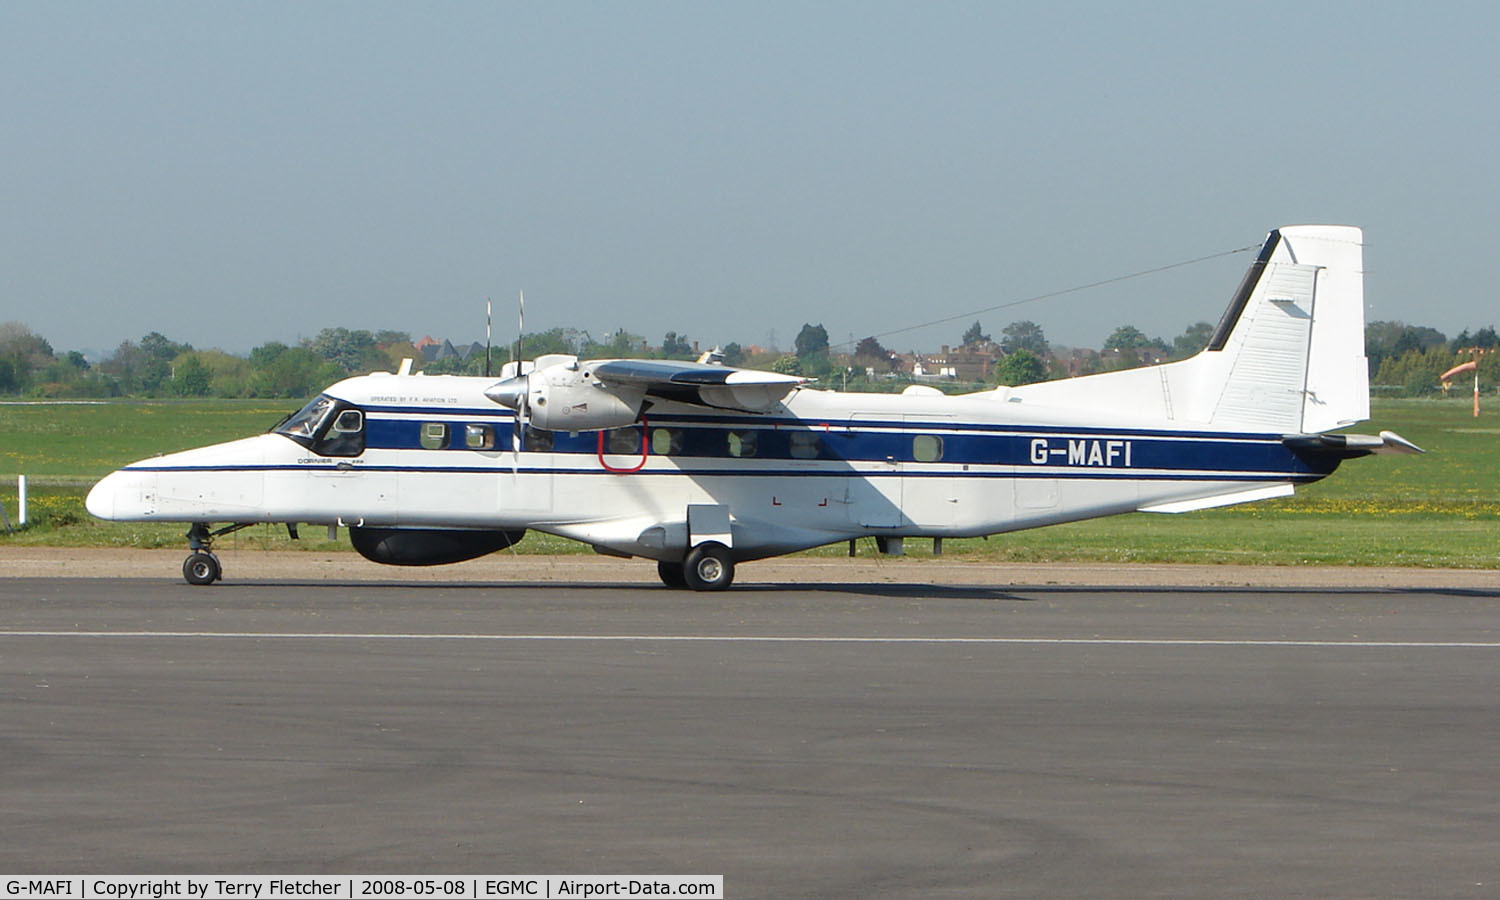 G-MAFI, 1986 Dornier 228-202K C/N 8115, One of two Ministry of Fisheries Do 228 at Southend today